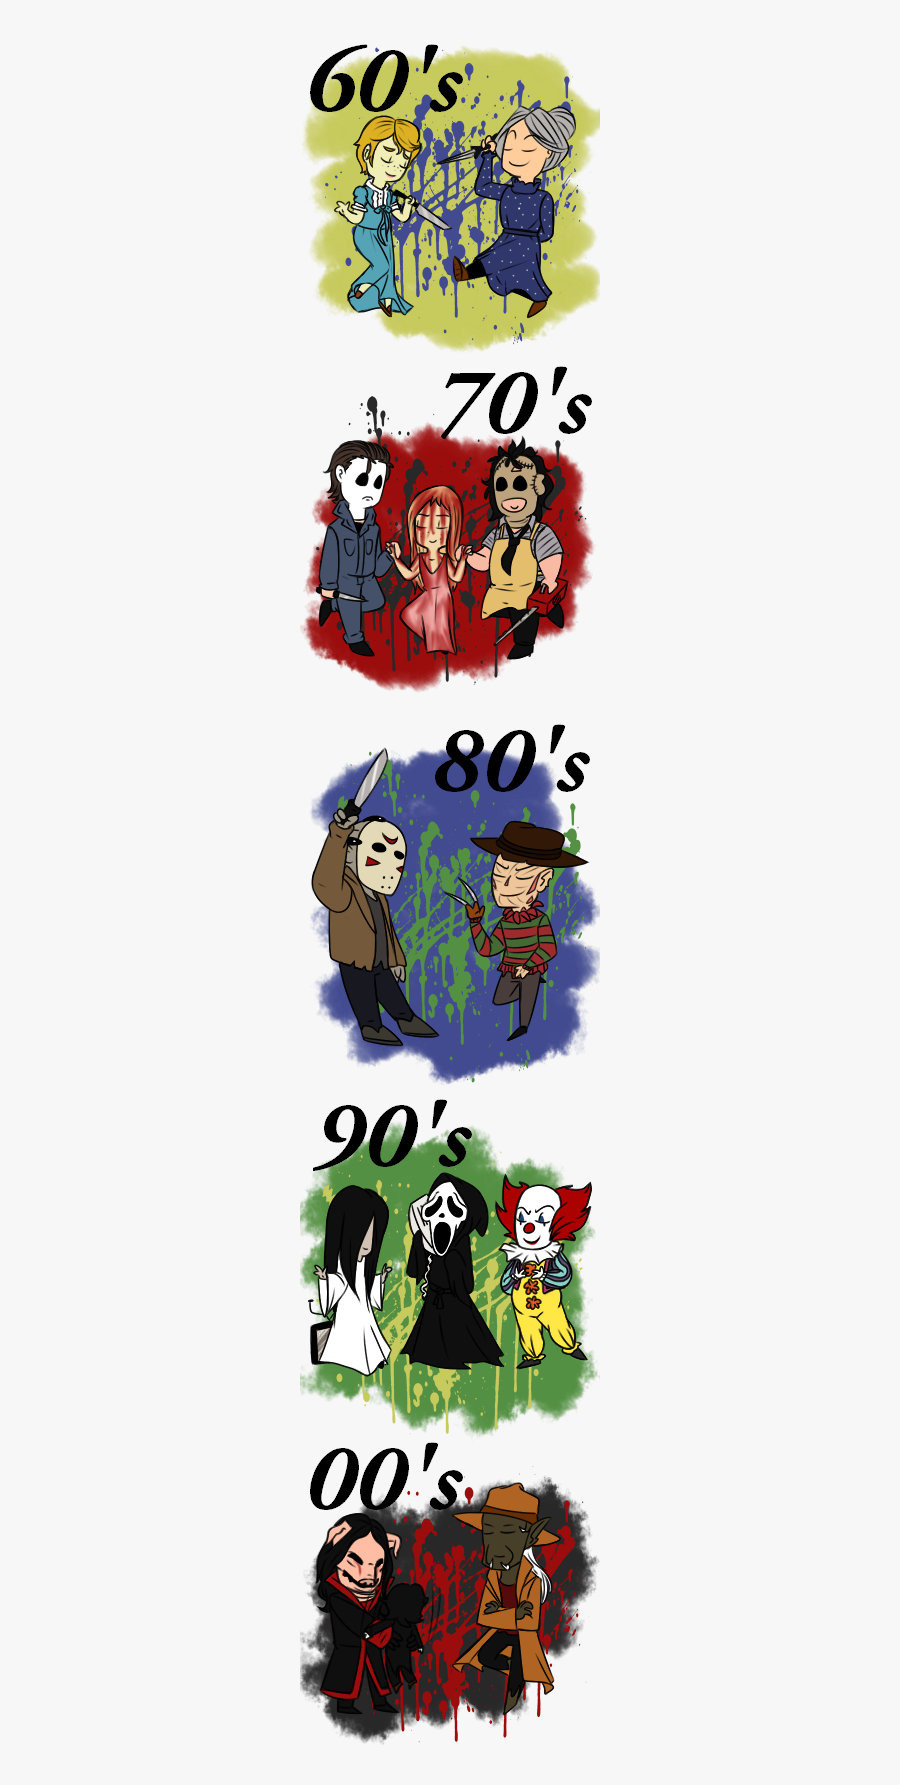 Easy Drawings Of Horror Movie Characters, Transparent Clipart